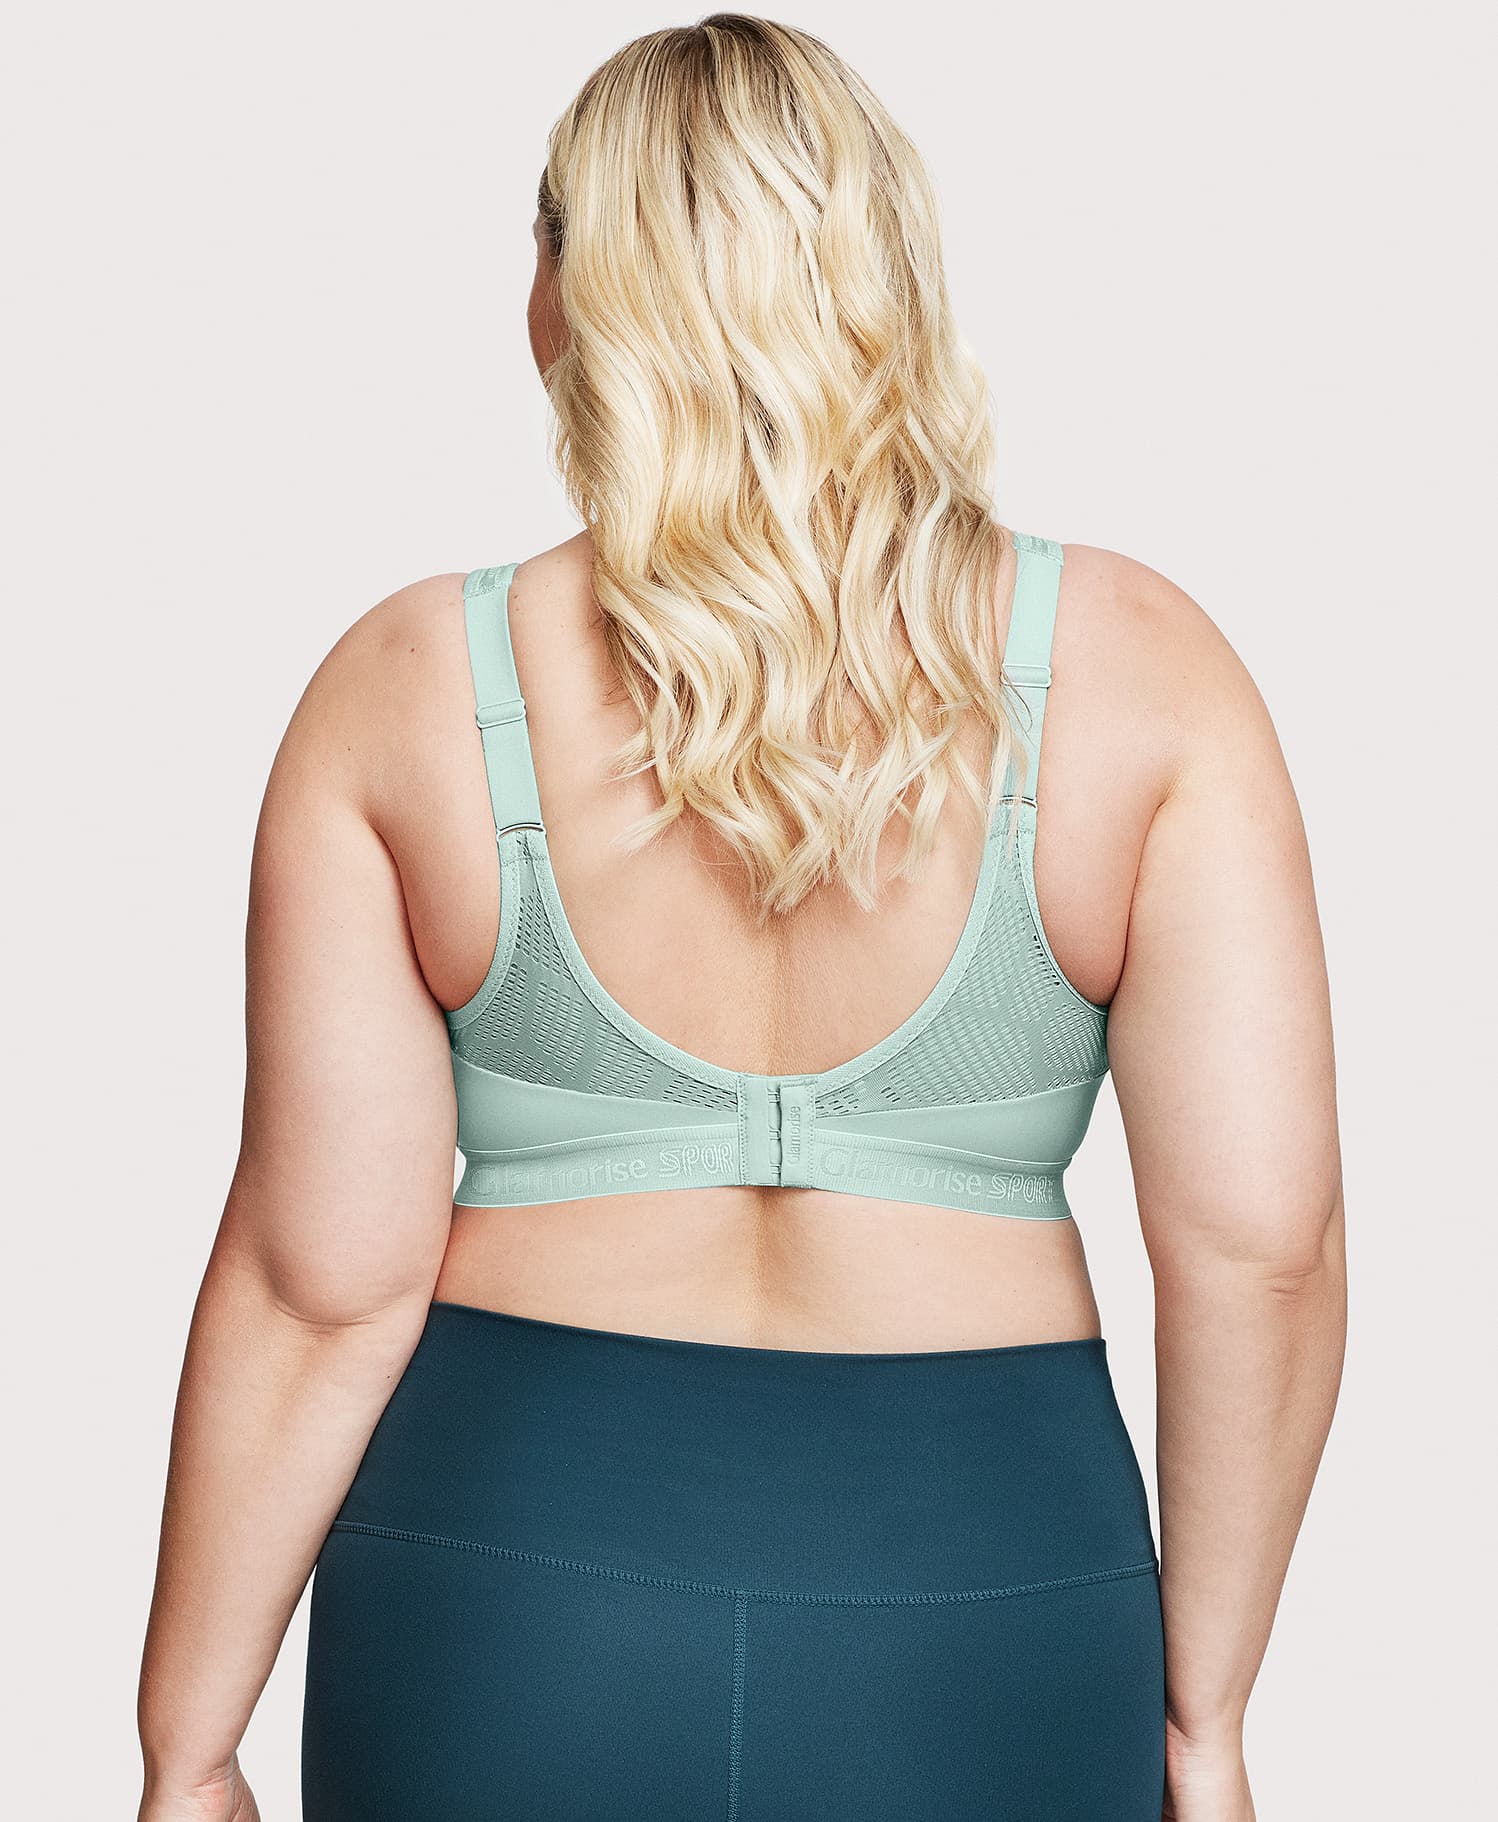 adidas adidas TLRD Move Training High-Support Bra (Plus Size